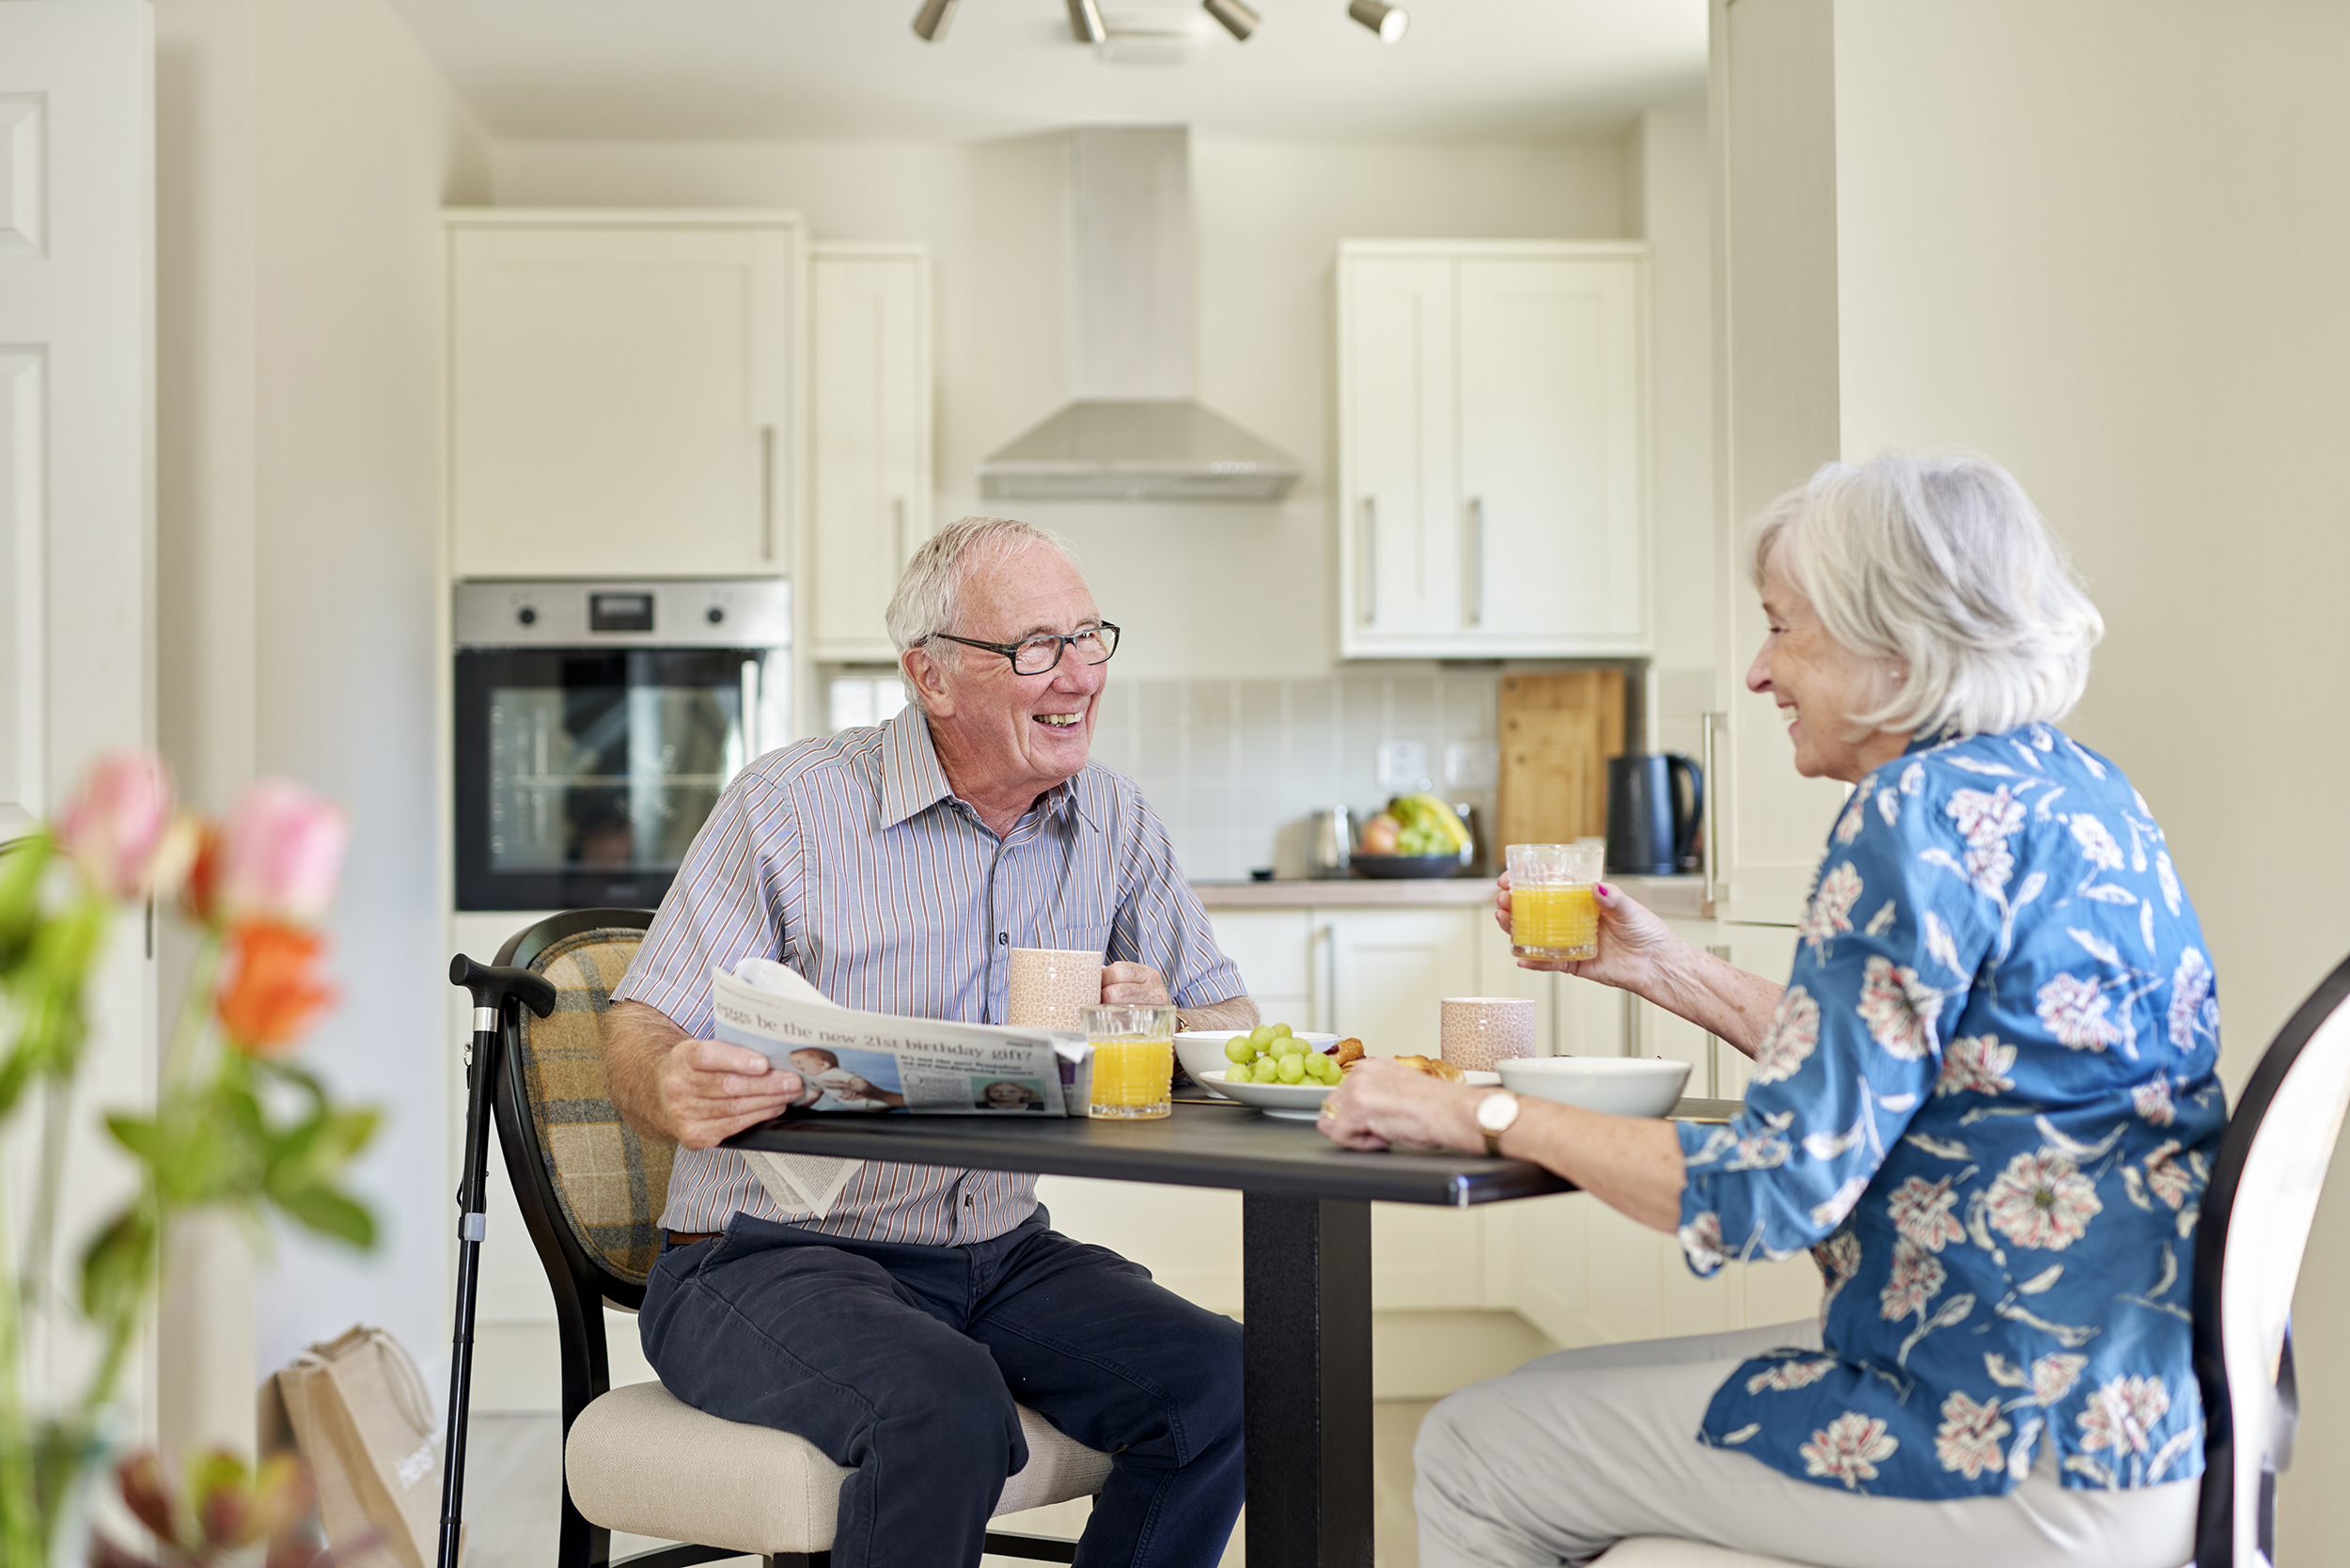 Stock image of a happy elderly couple - Start your property journey on Share to Buy!